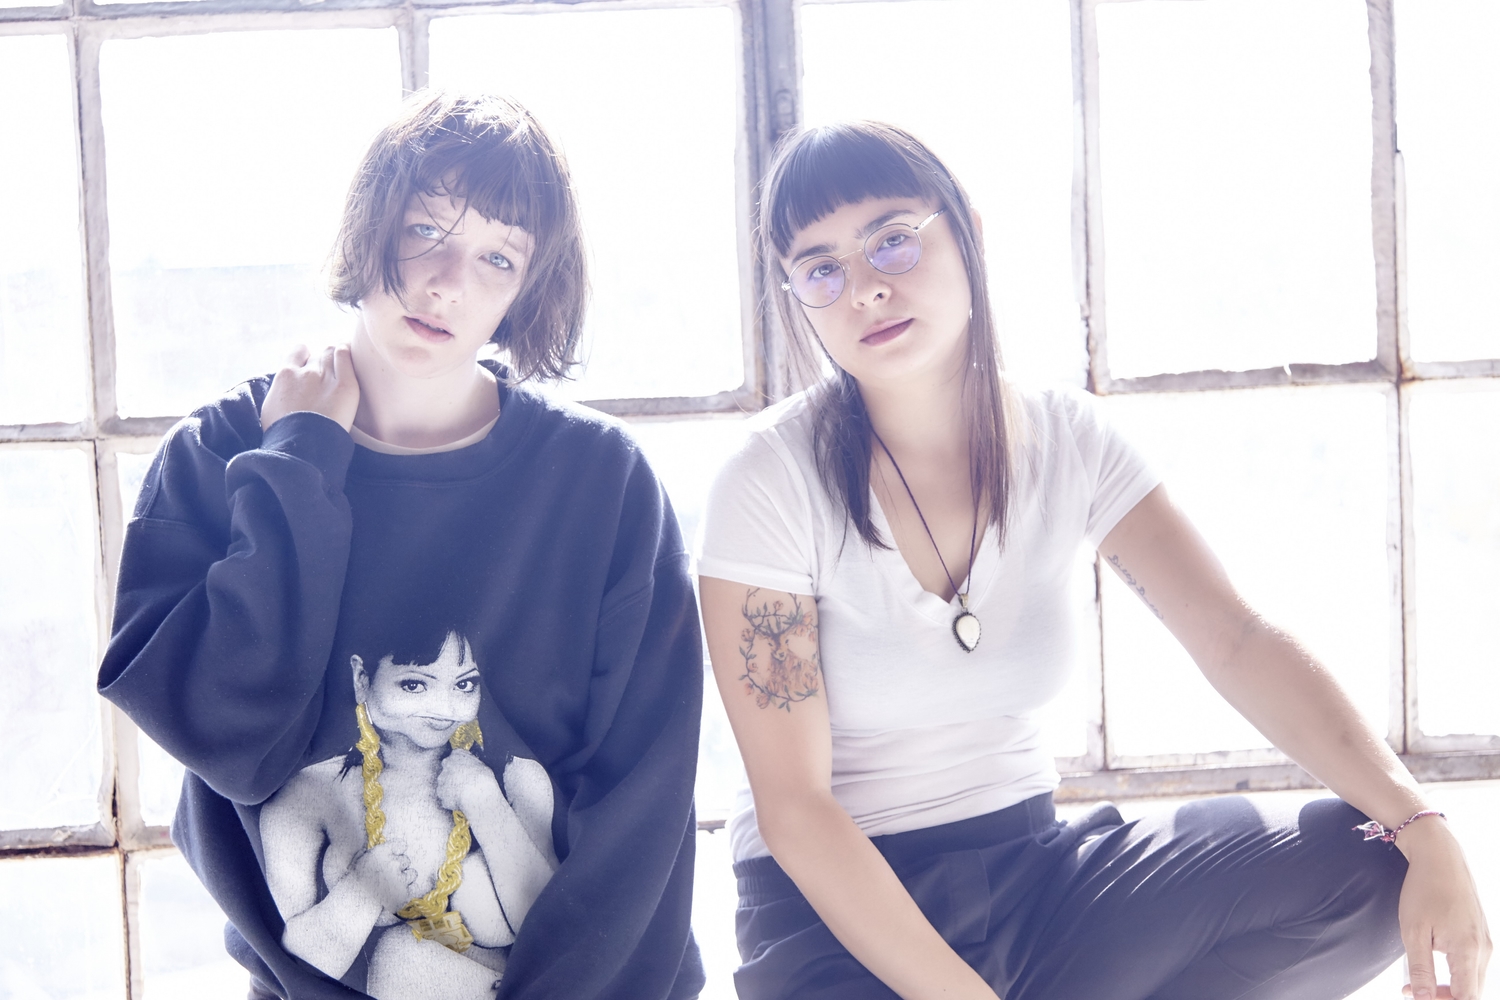 Dilly Dally announce new remix EP ‘fkkt’ - listen to the CRIM3S remix of ‘Desire’